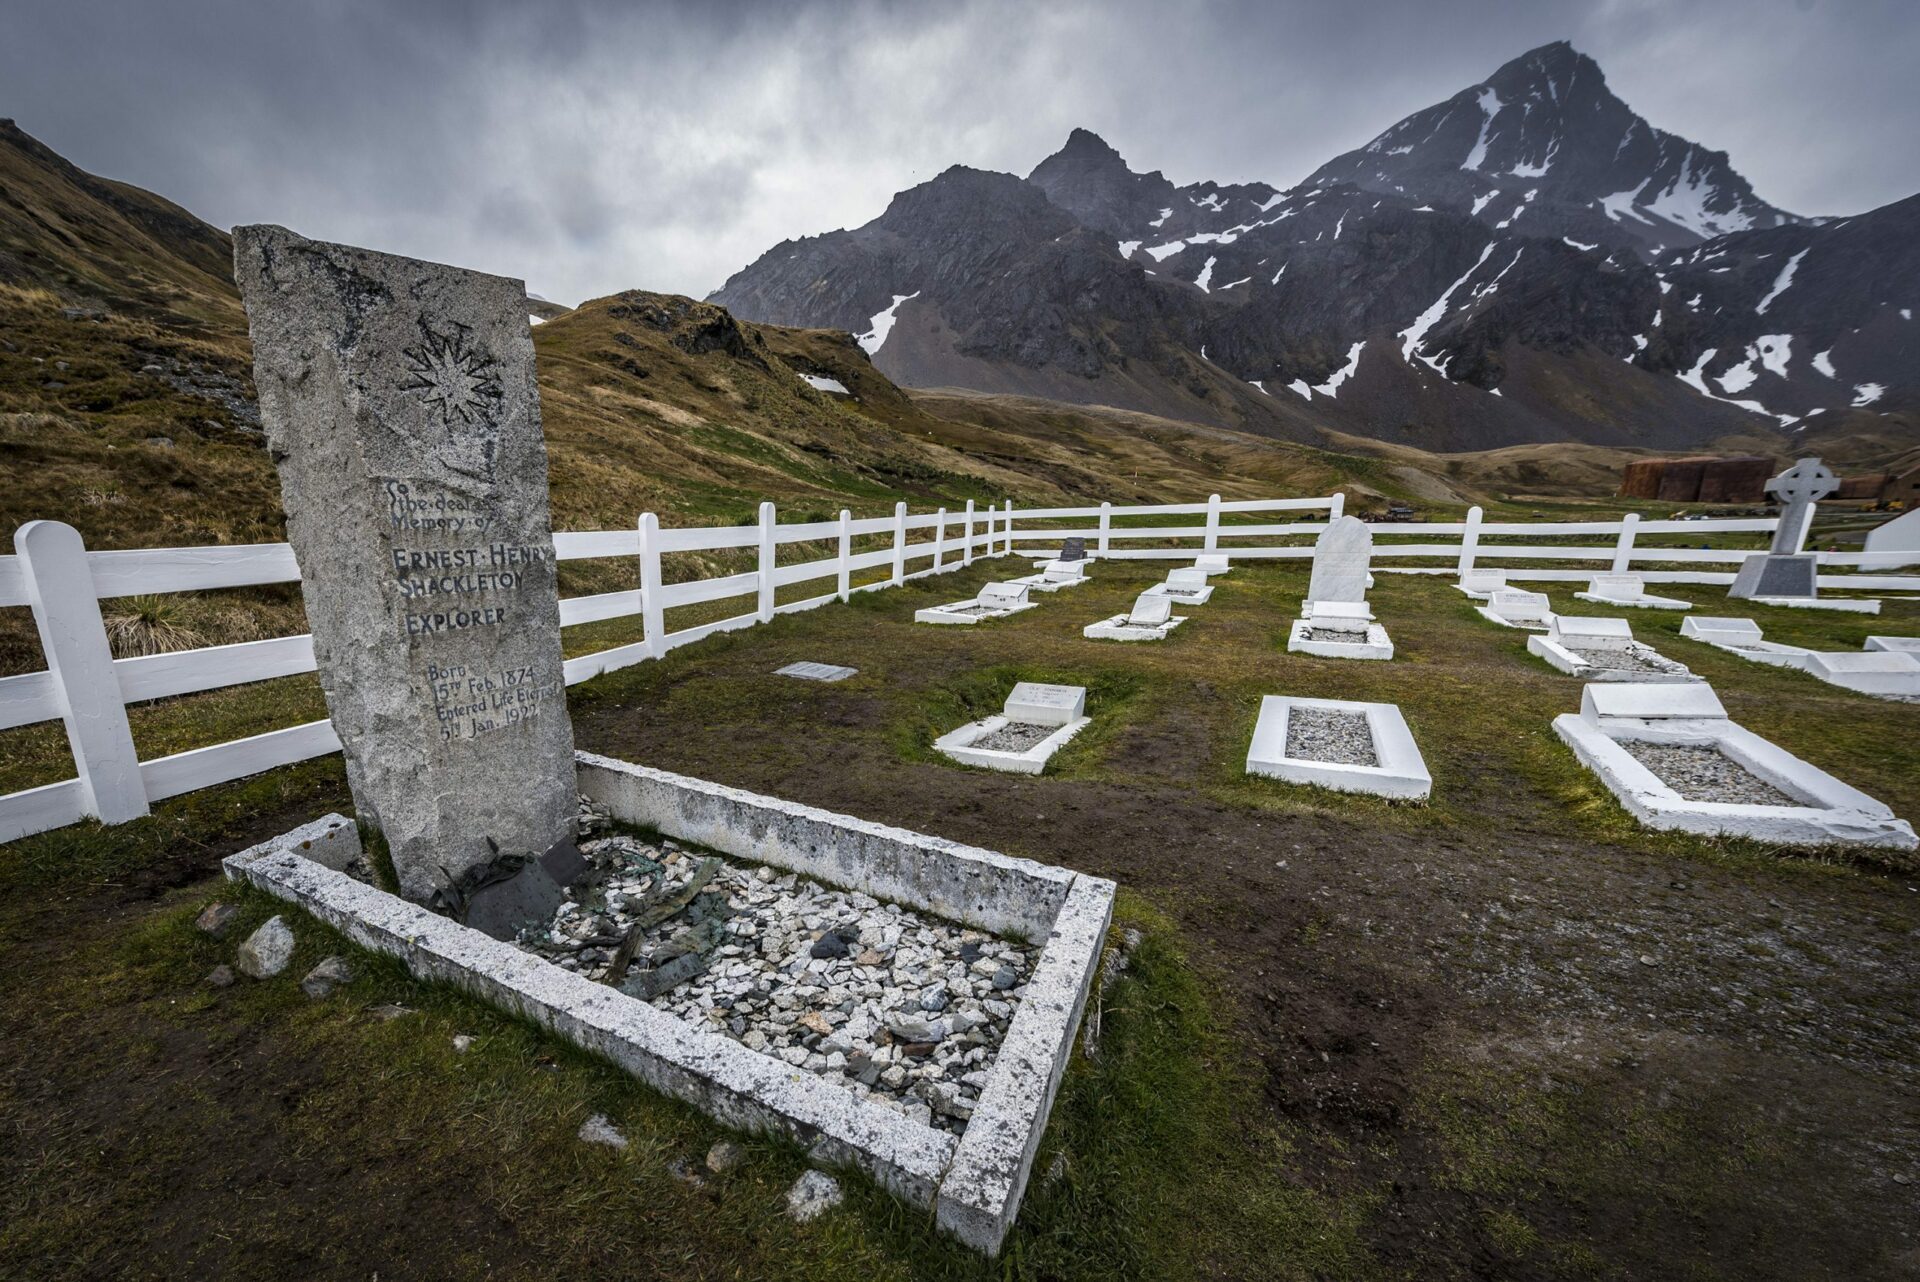 the tomb of explorer Ernest Shackleton in a small graveyard with mountains in the background